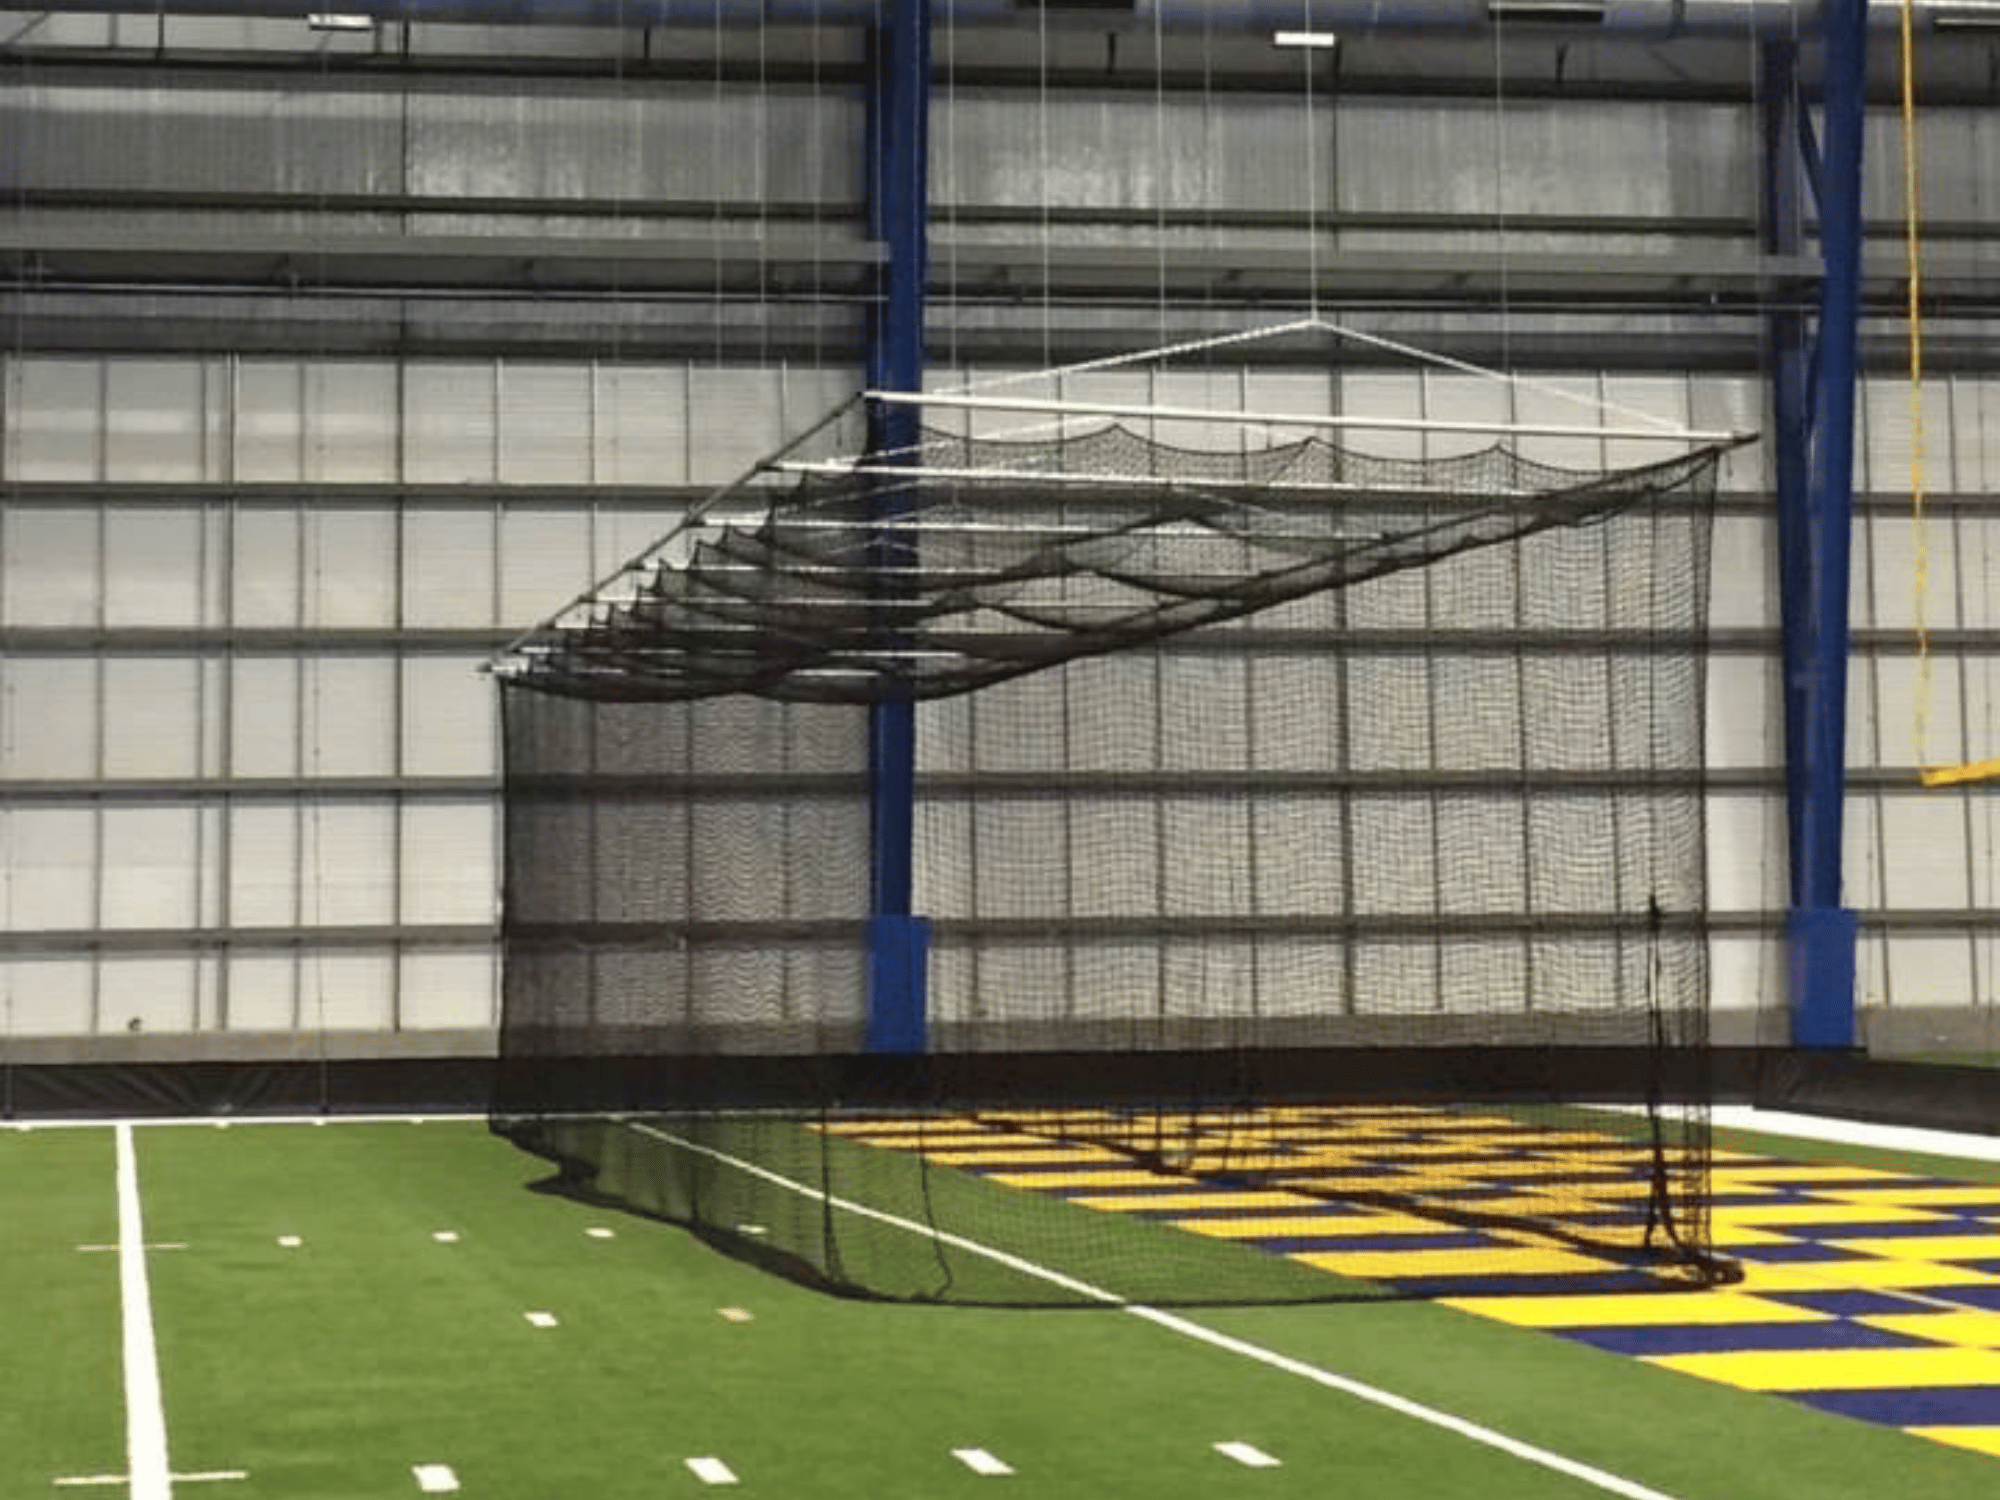 Indoor Batting Cage that is suspended from the ceiling